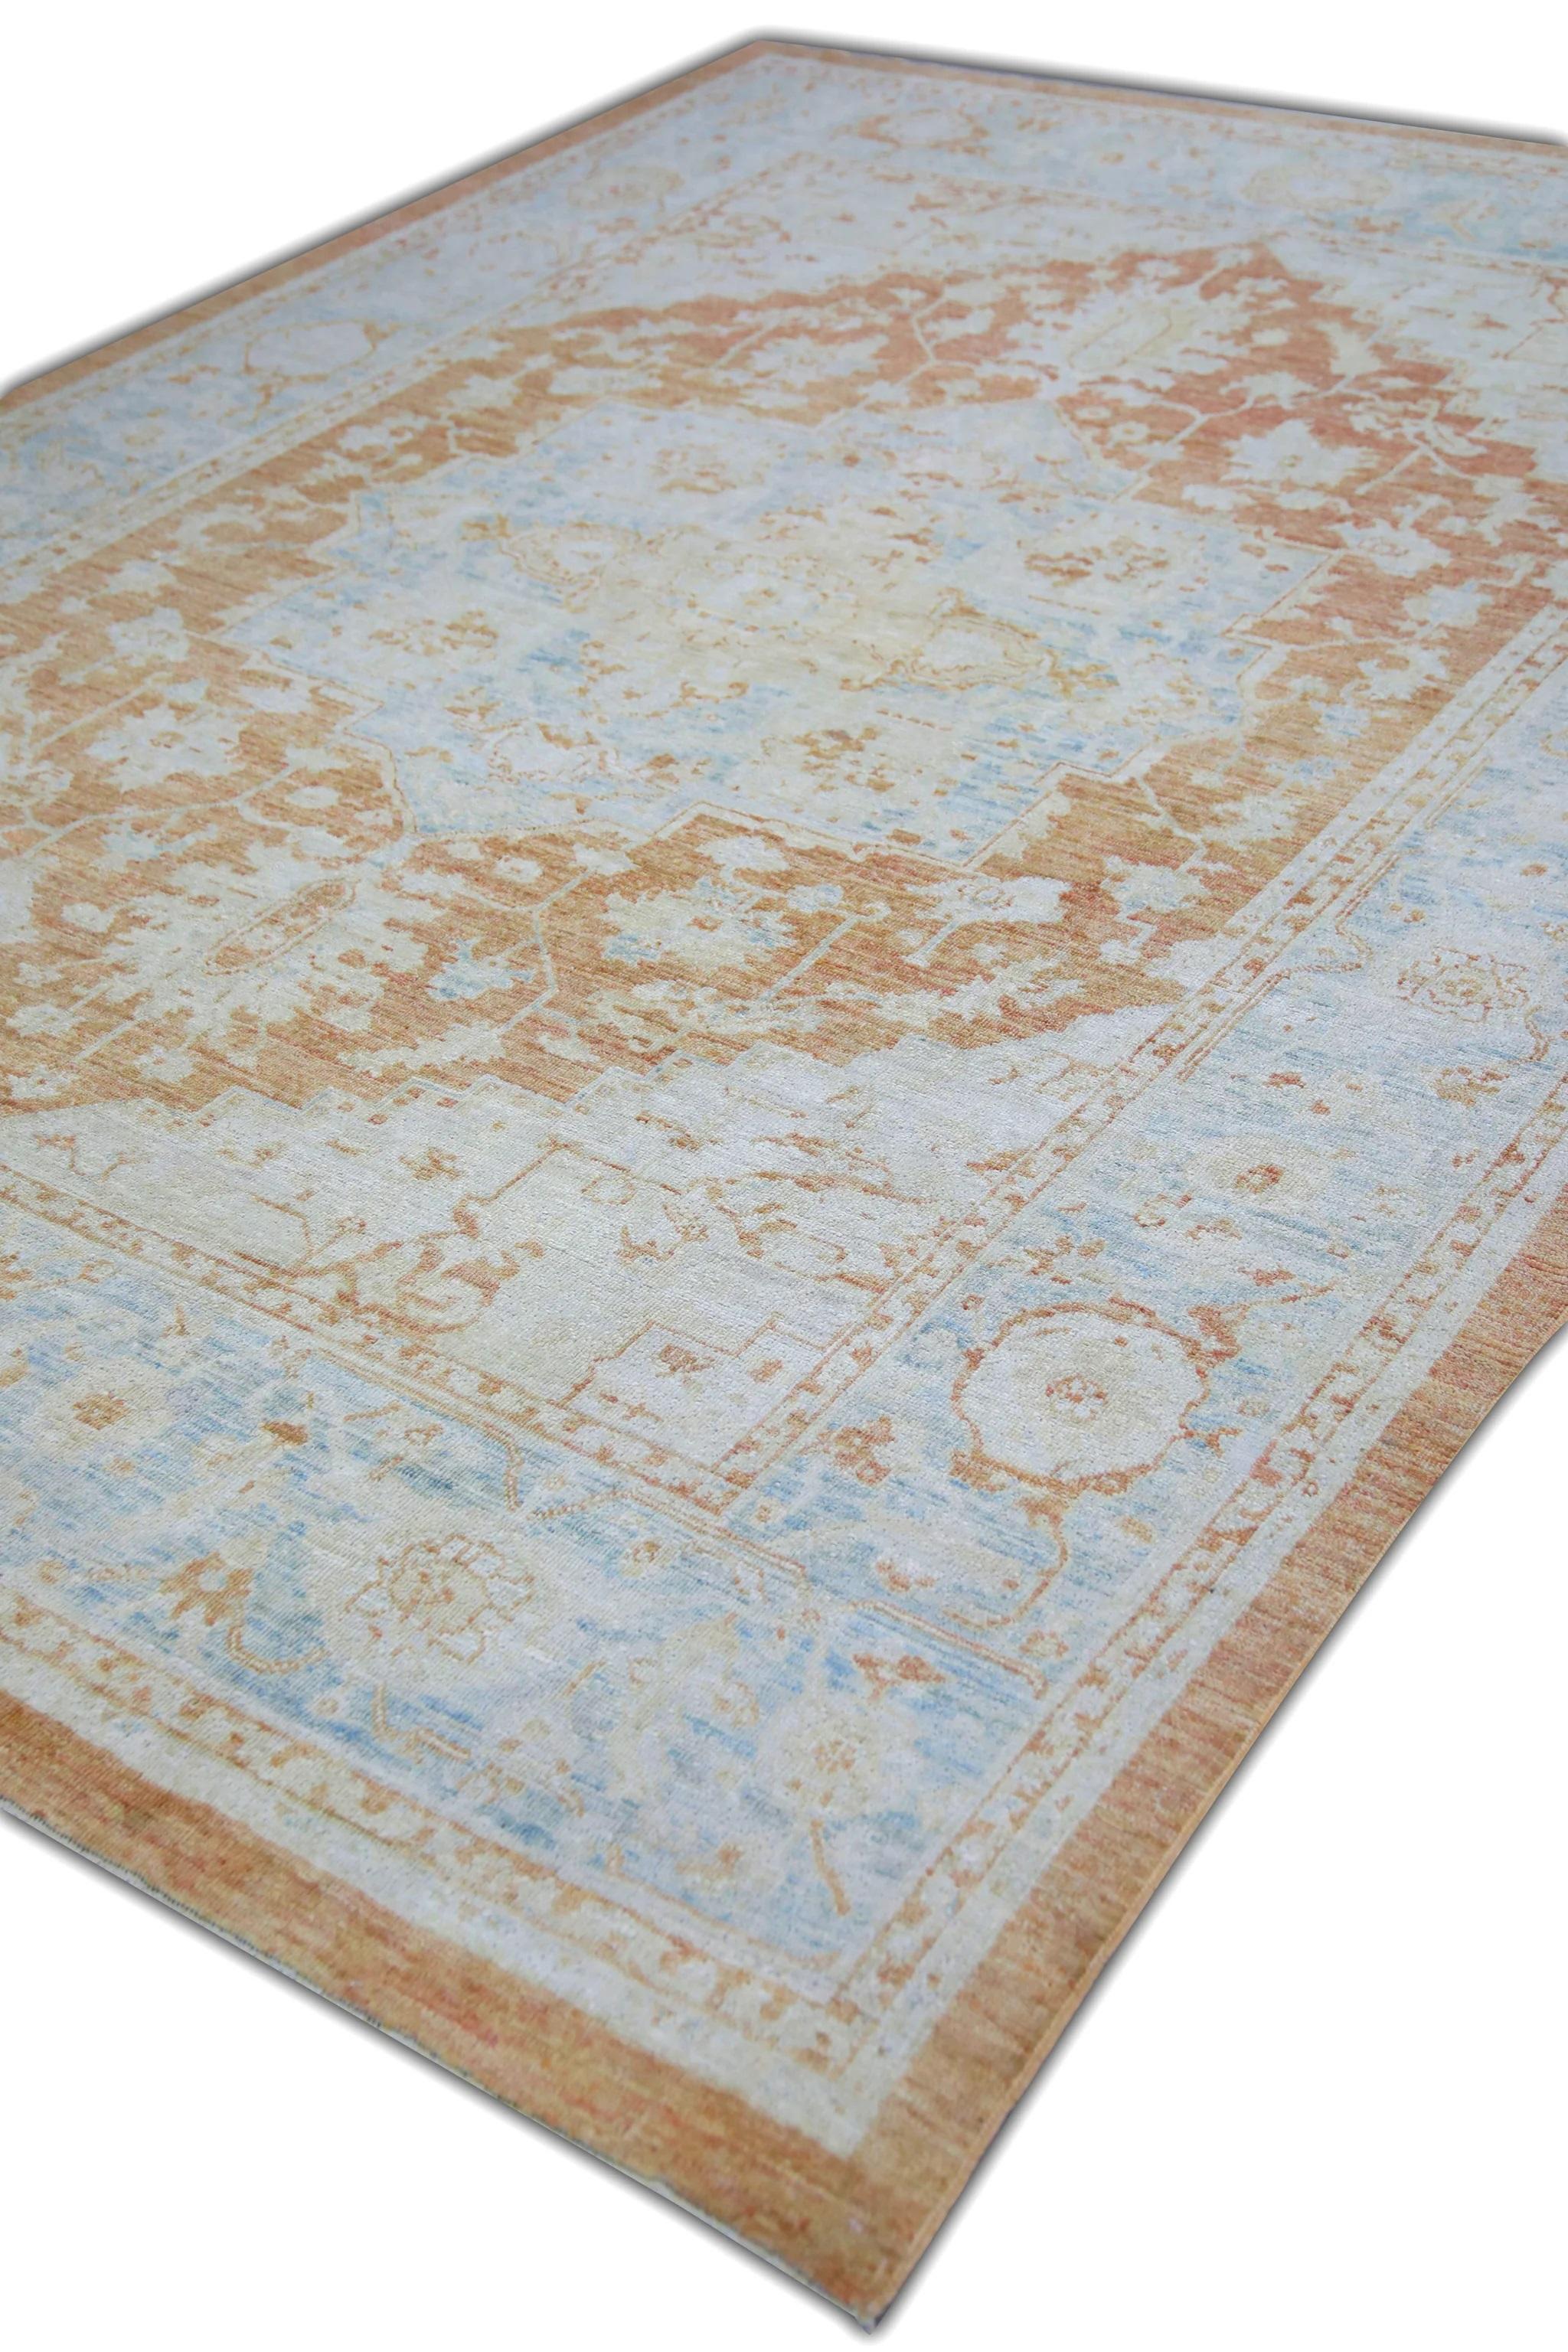 Contemporary Floral Turkish Finewoven Wool Oushak Rug in Baby Blue and Salmon 7'9